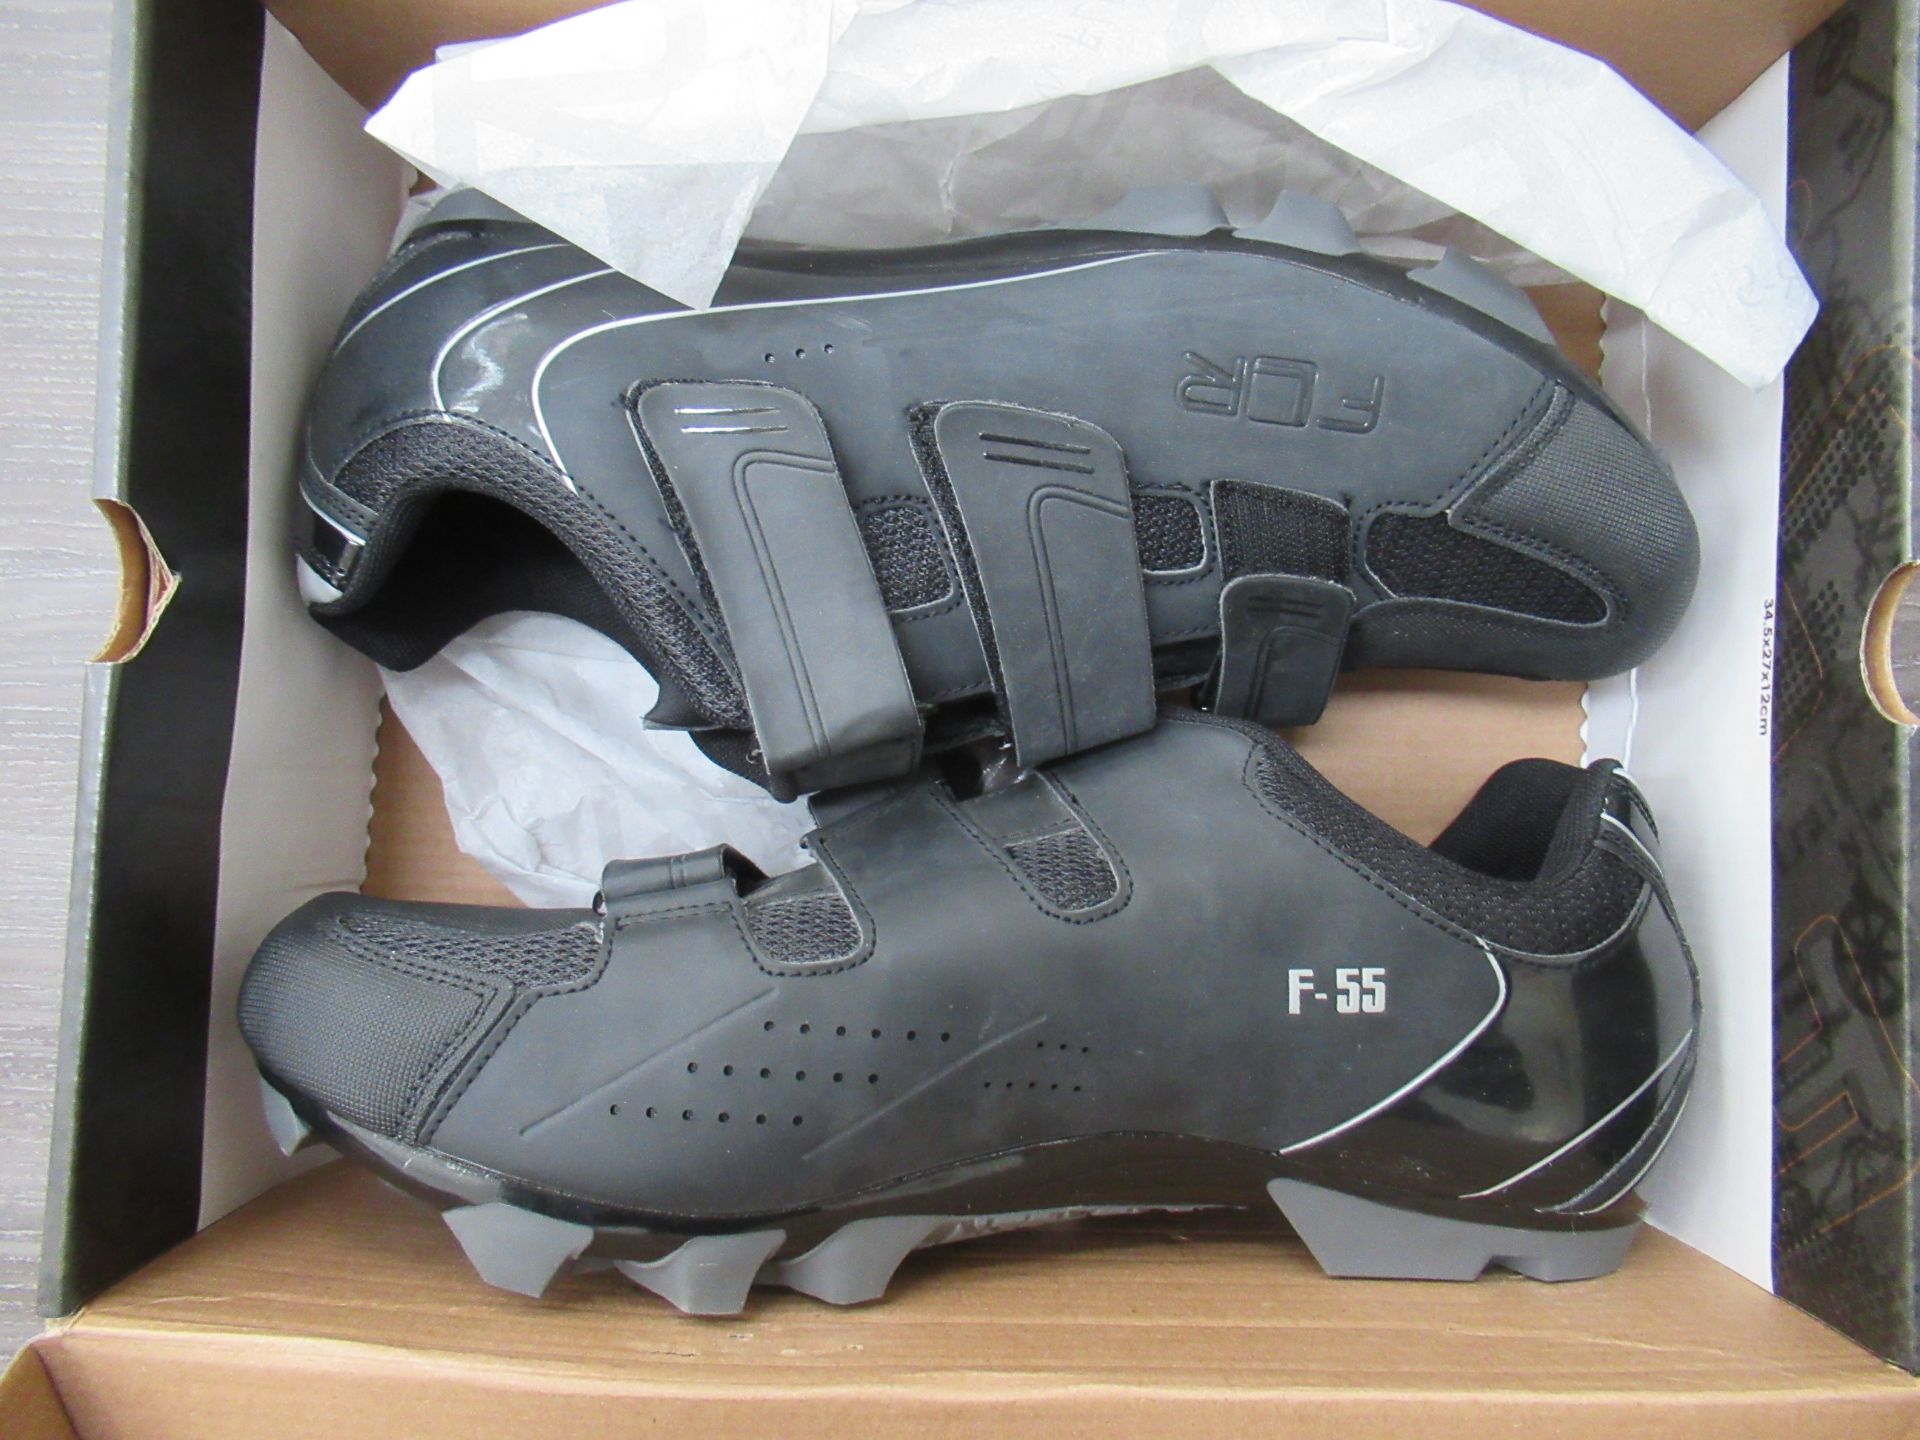 3 x Pairs of FLR cycling shoes - 1 x Bushmaster boxed EU size 41 (RRP£79.99); 1 x F-11 boxed EU size - Image 9 of 10